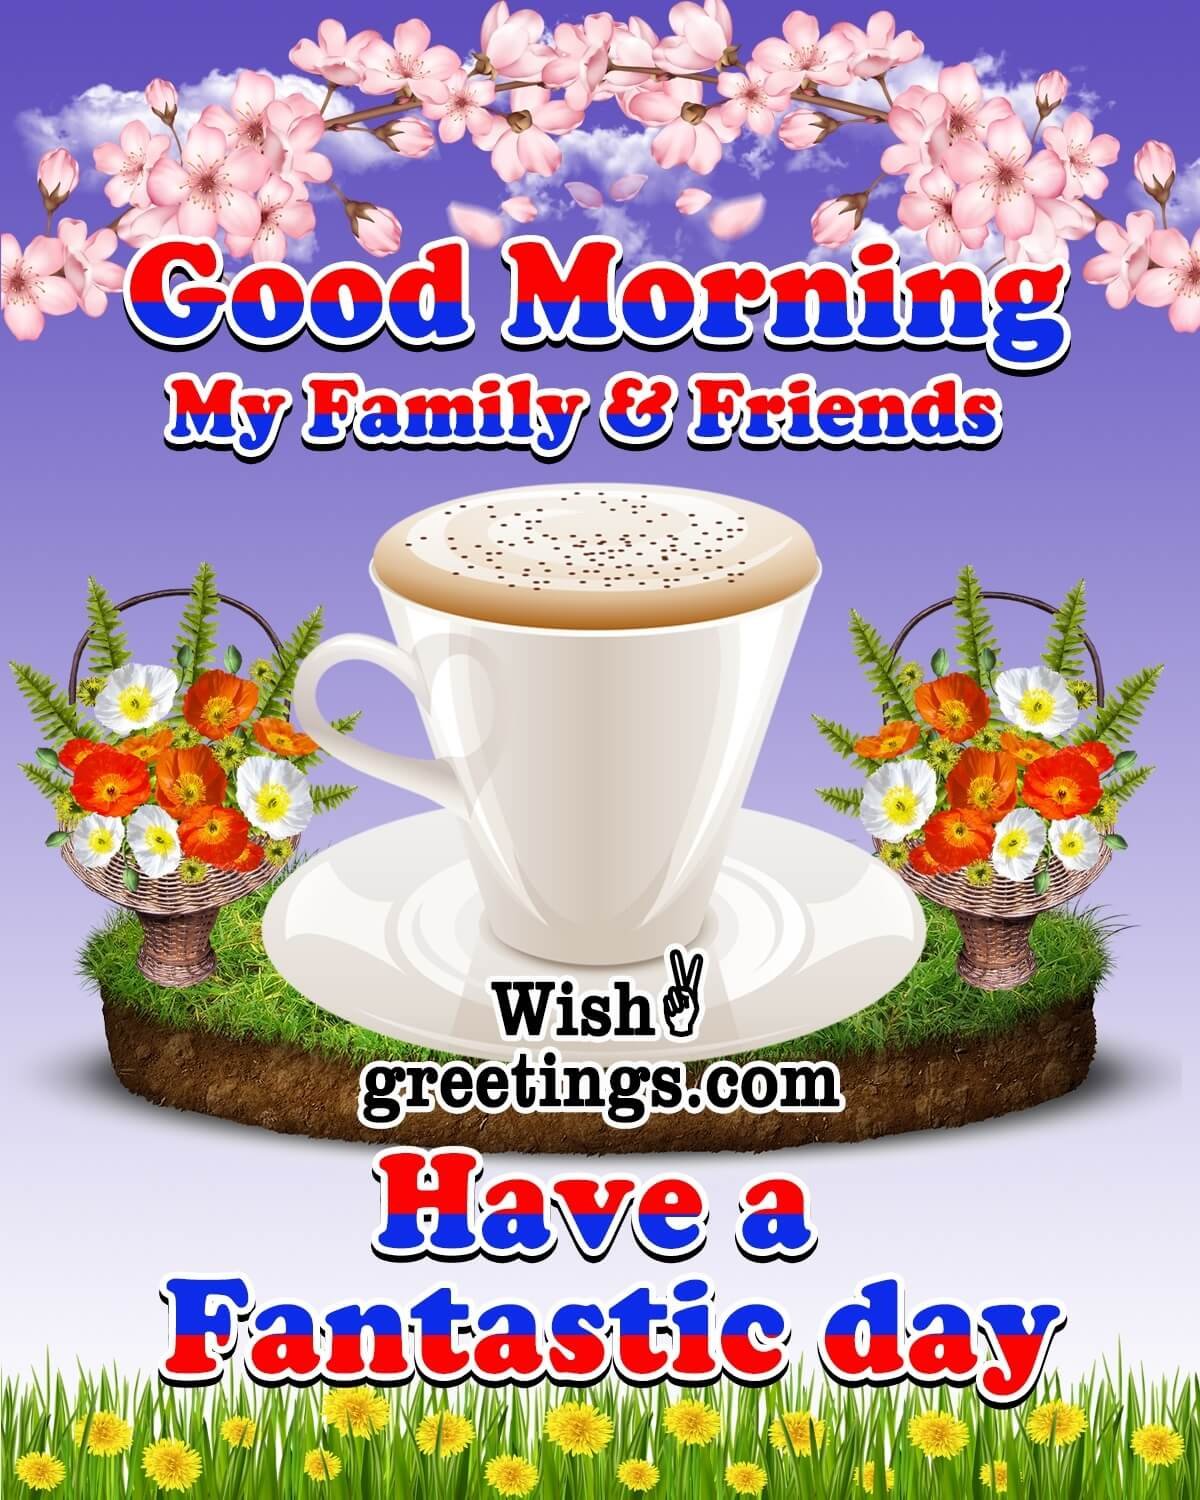 Good Morning My Family & Friends